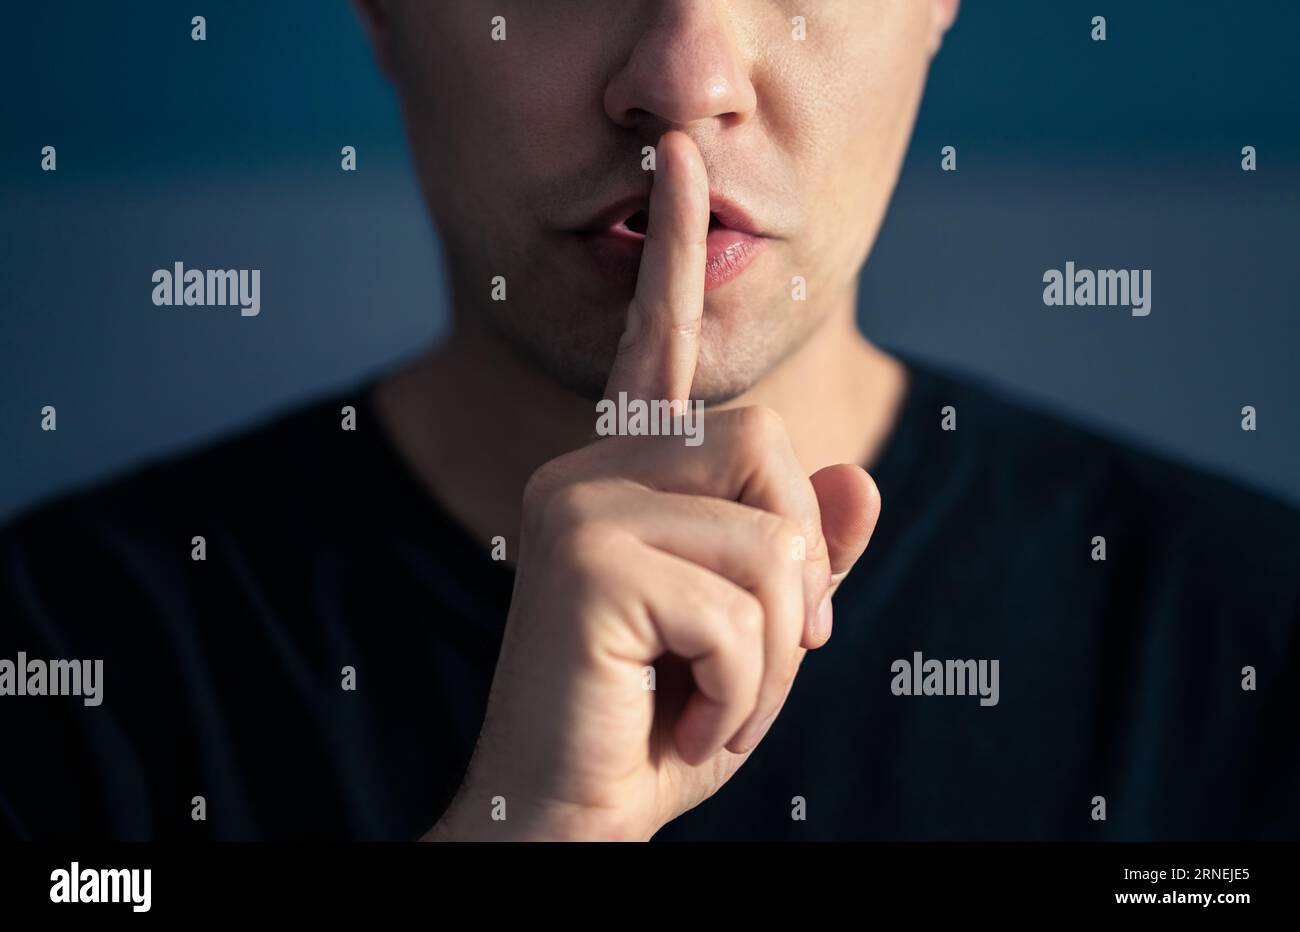 Secret and silence. Quiet silent shh gesture with finger on lips. Man doing expression with hand on mouth. Taboo topic, censorship or freedom. Stock Photo